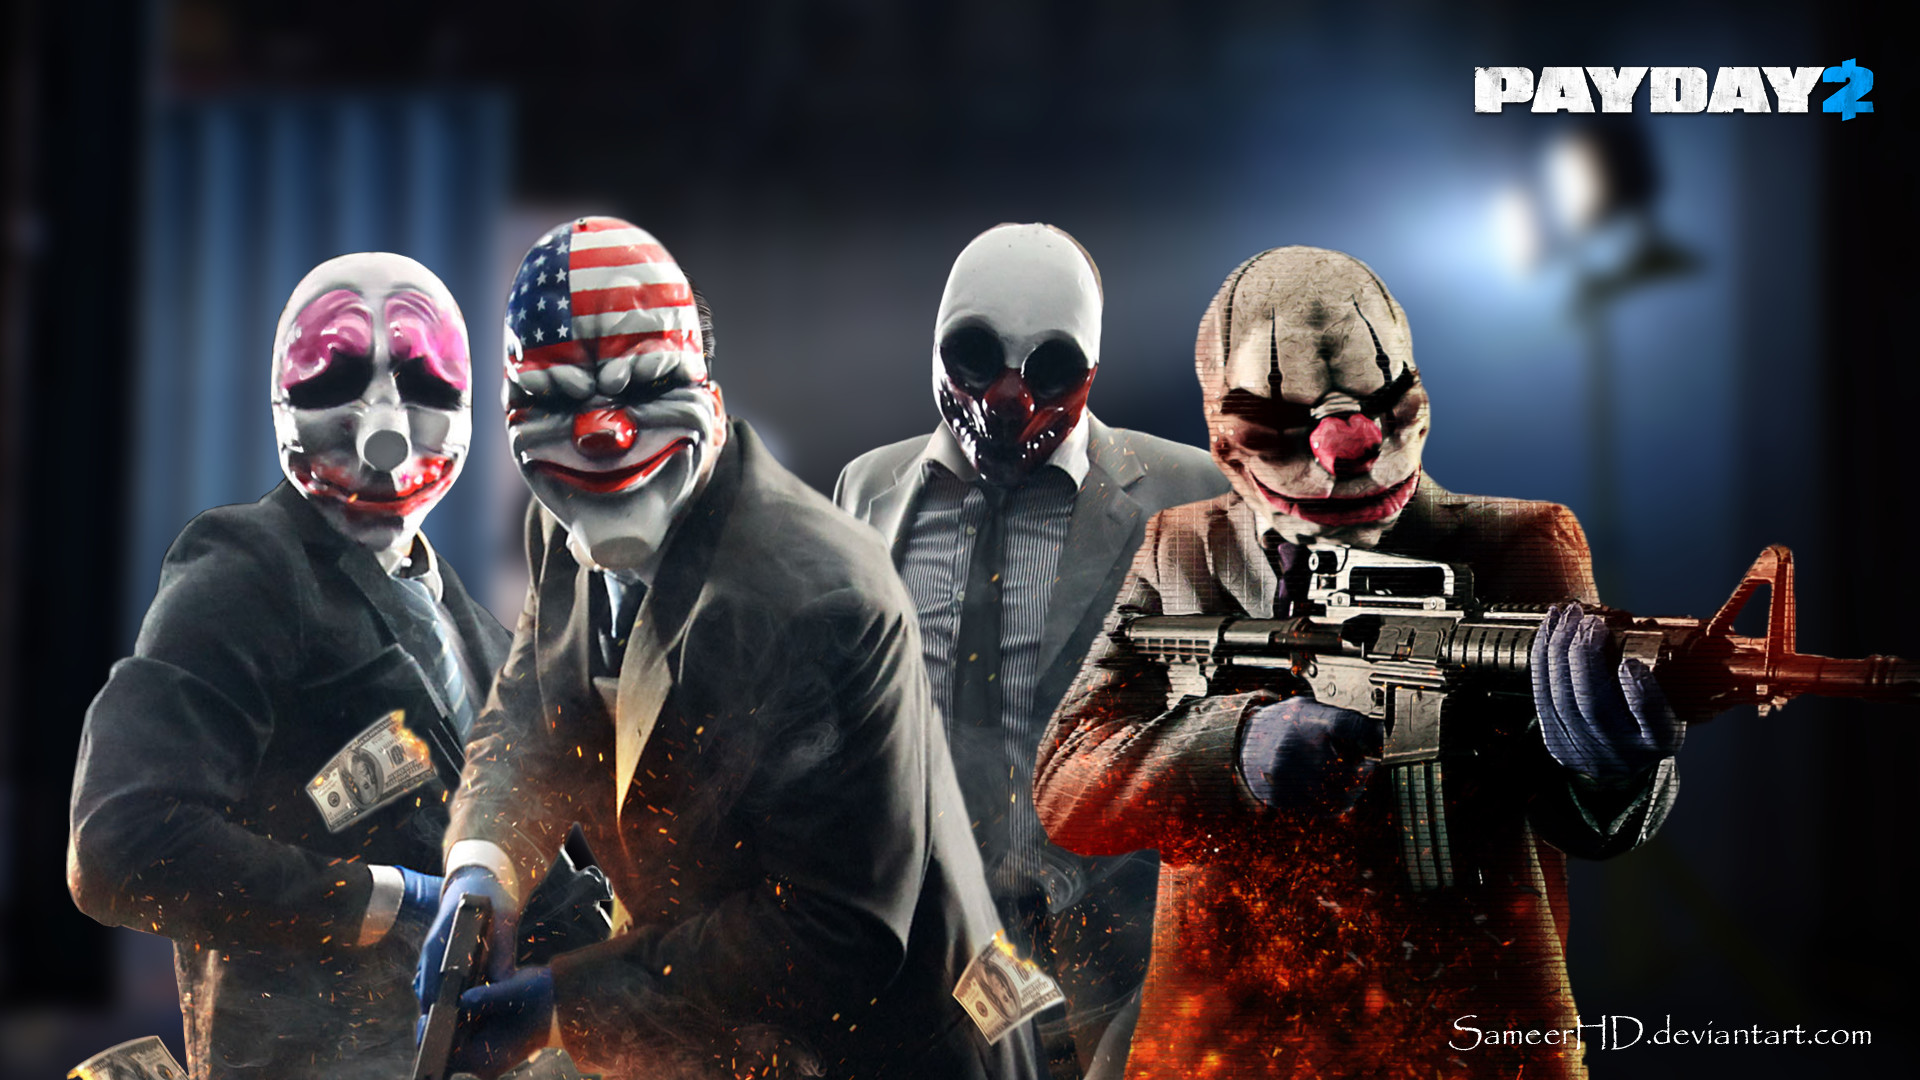 Payday 2 Wallpapers 87 Pictures Images, Photos, Reviews